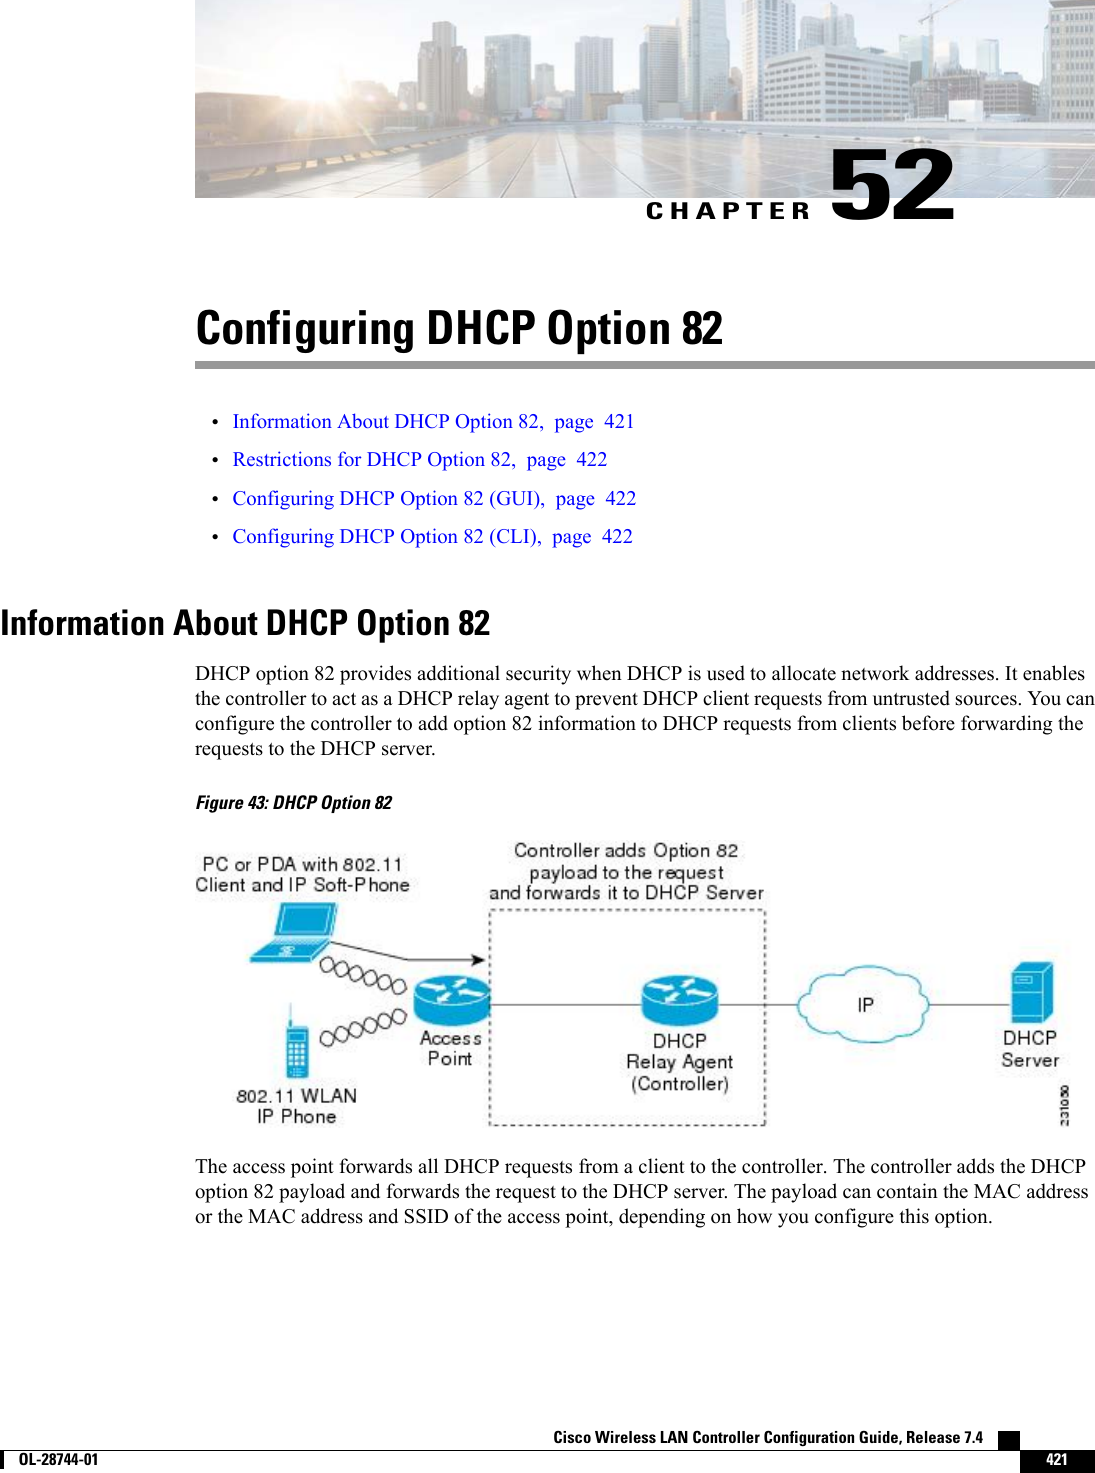 CHAPTER 52Configuring DHCP Option 82•Information About DHCP Option 82, page 421•Restrictions for DHCP Option 82, page 422•Configuring DHCP Option 82 (GUI), page 422•Configuring DHCP Option 82 (CLI), page 422Information About DHCP Option 82DHCP option 82 provides additional security when DHCP is used to allocate network addresses. It enablesthe controller to act as a DHCP relay agent to prevent DHCP client requests from untrusted sources. You canconfigure the controller to add option 82 information to DHCP requests from clients before forwarding therequests to the DHCP server.Figure 43: DHCP Option 82The access point forwards all DHCP requests from a client to the controller. The controller adds the DHCPoption 82 payload and forwards the request to the DHCP server. The payload can contain the MAC addressor the MAC address and SSID of the access point, depending on how you configure this option.Cisco Wireless LAN Controller Configuration Guide, Release 7.4        OL-28744-01 421